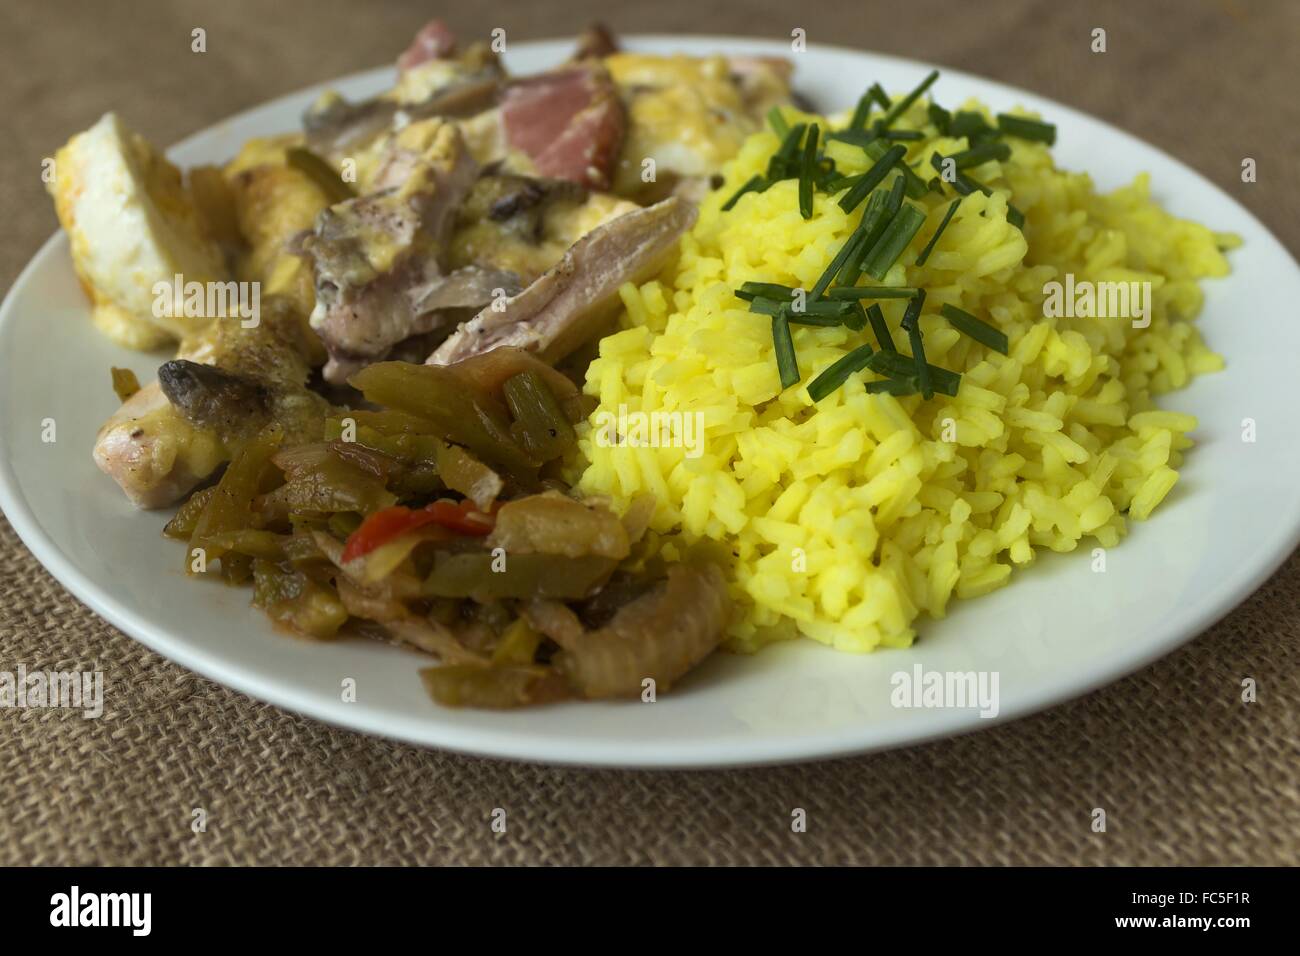 picture taken January 16, 2016 Jablonec nad Nisou, Czech Republic baked chicken with rice and pickles on a white plate light bac Stock Photo